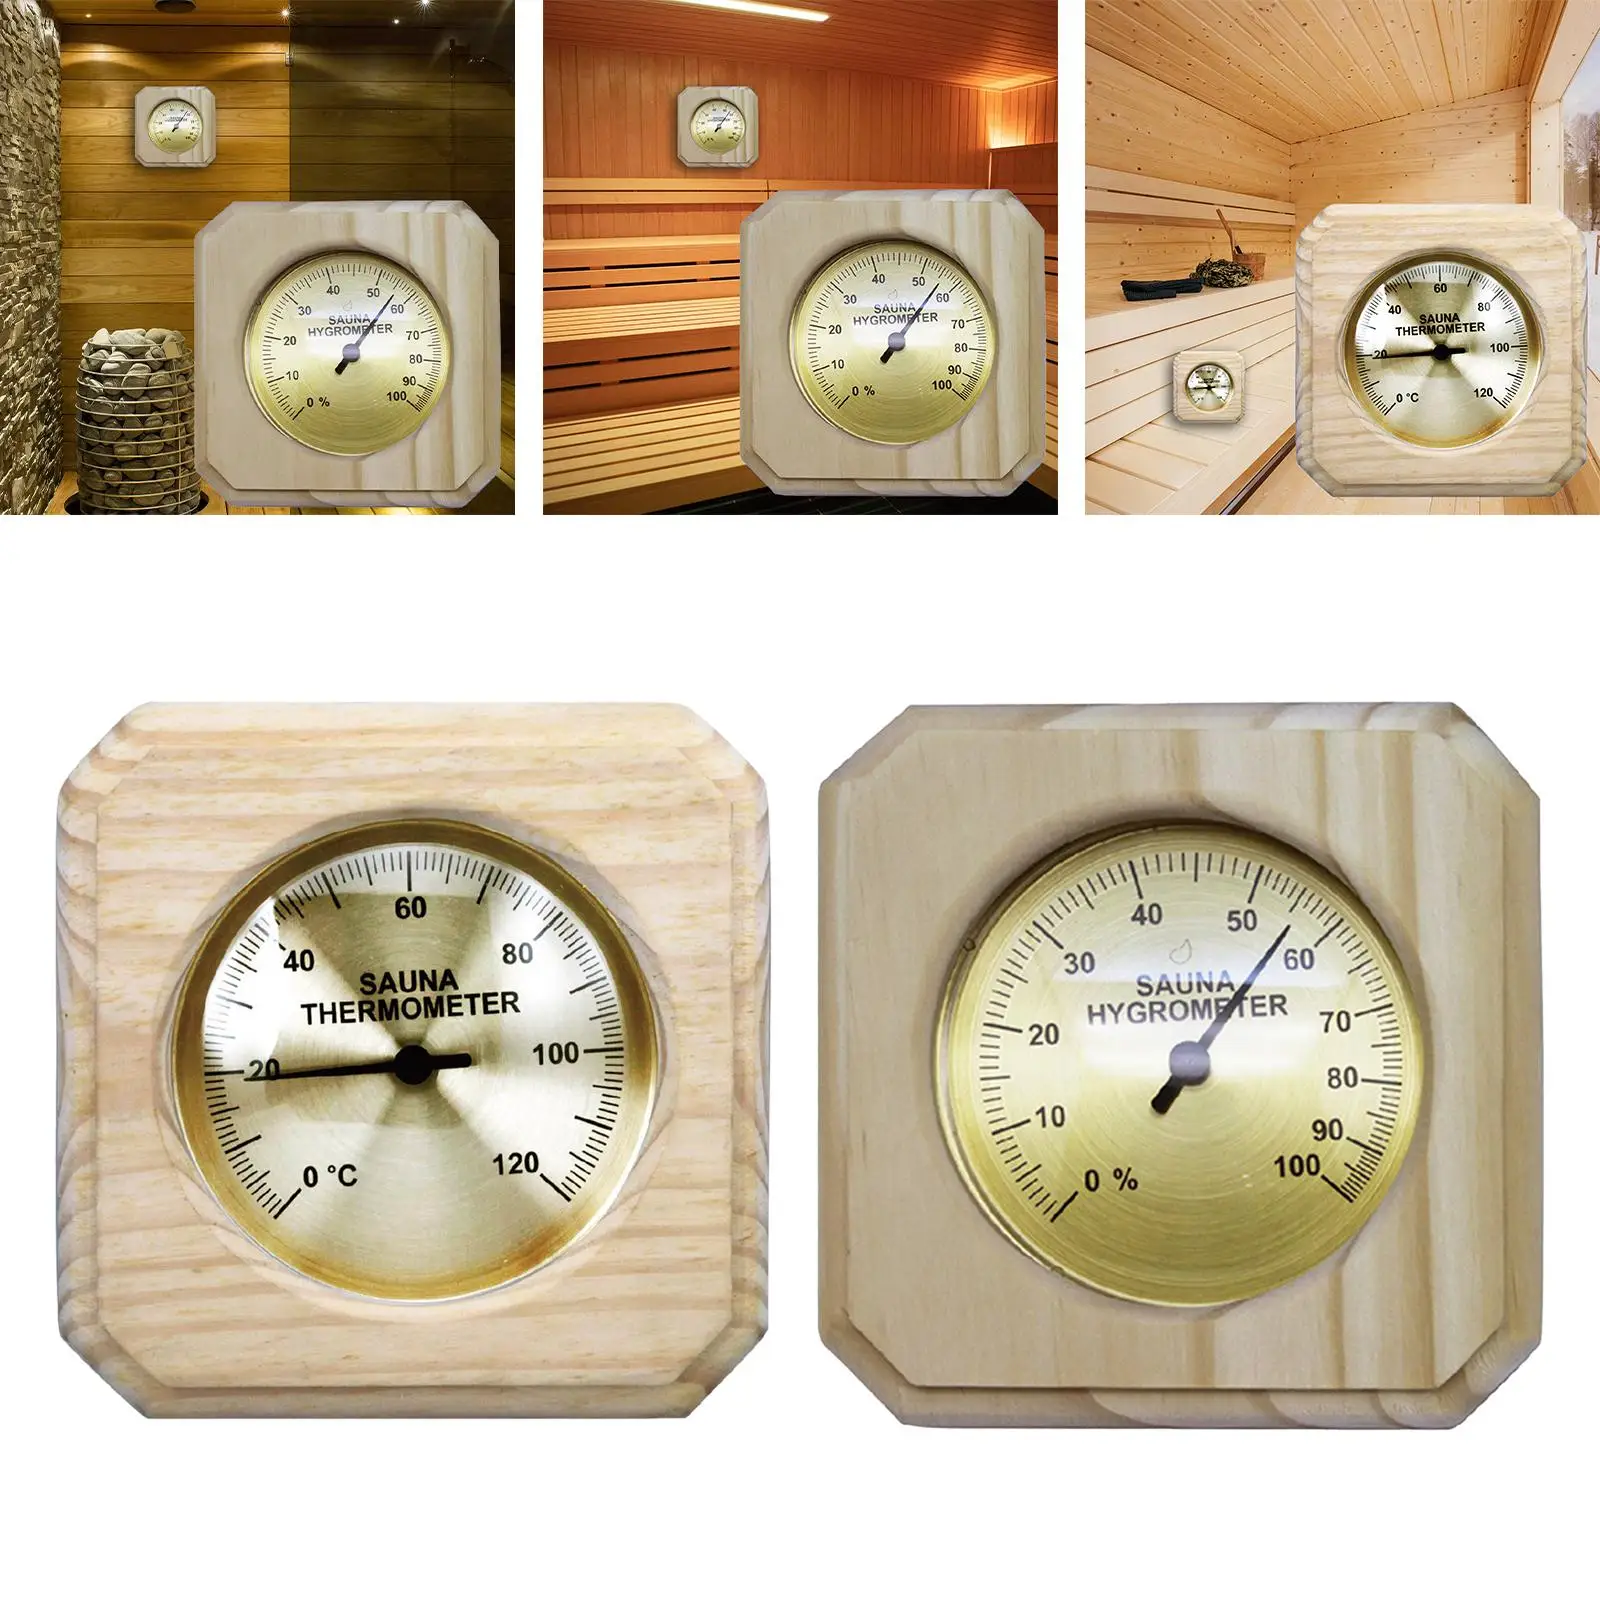 Multifunction Sauna Temperature Hygrometer Monitor Gauge Wall Hanging Measurement Tool Hygrothermograph for Greenhouse Office